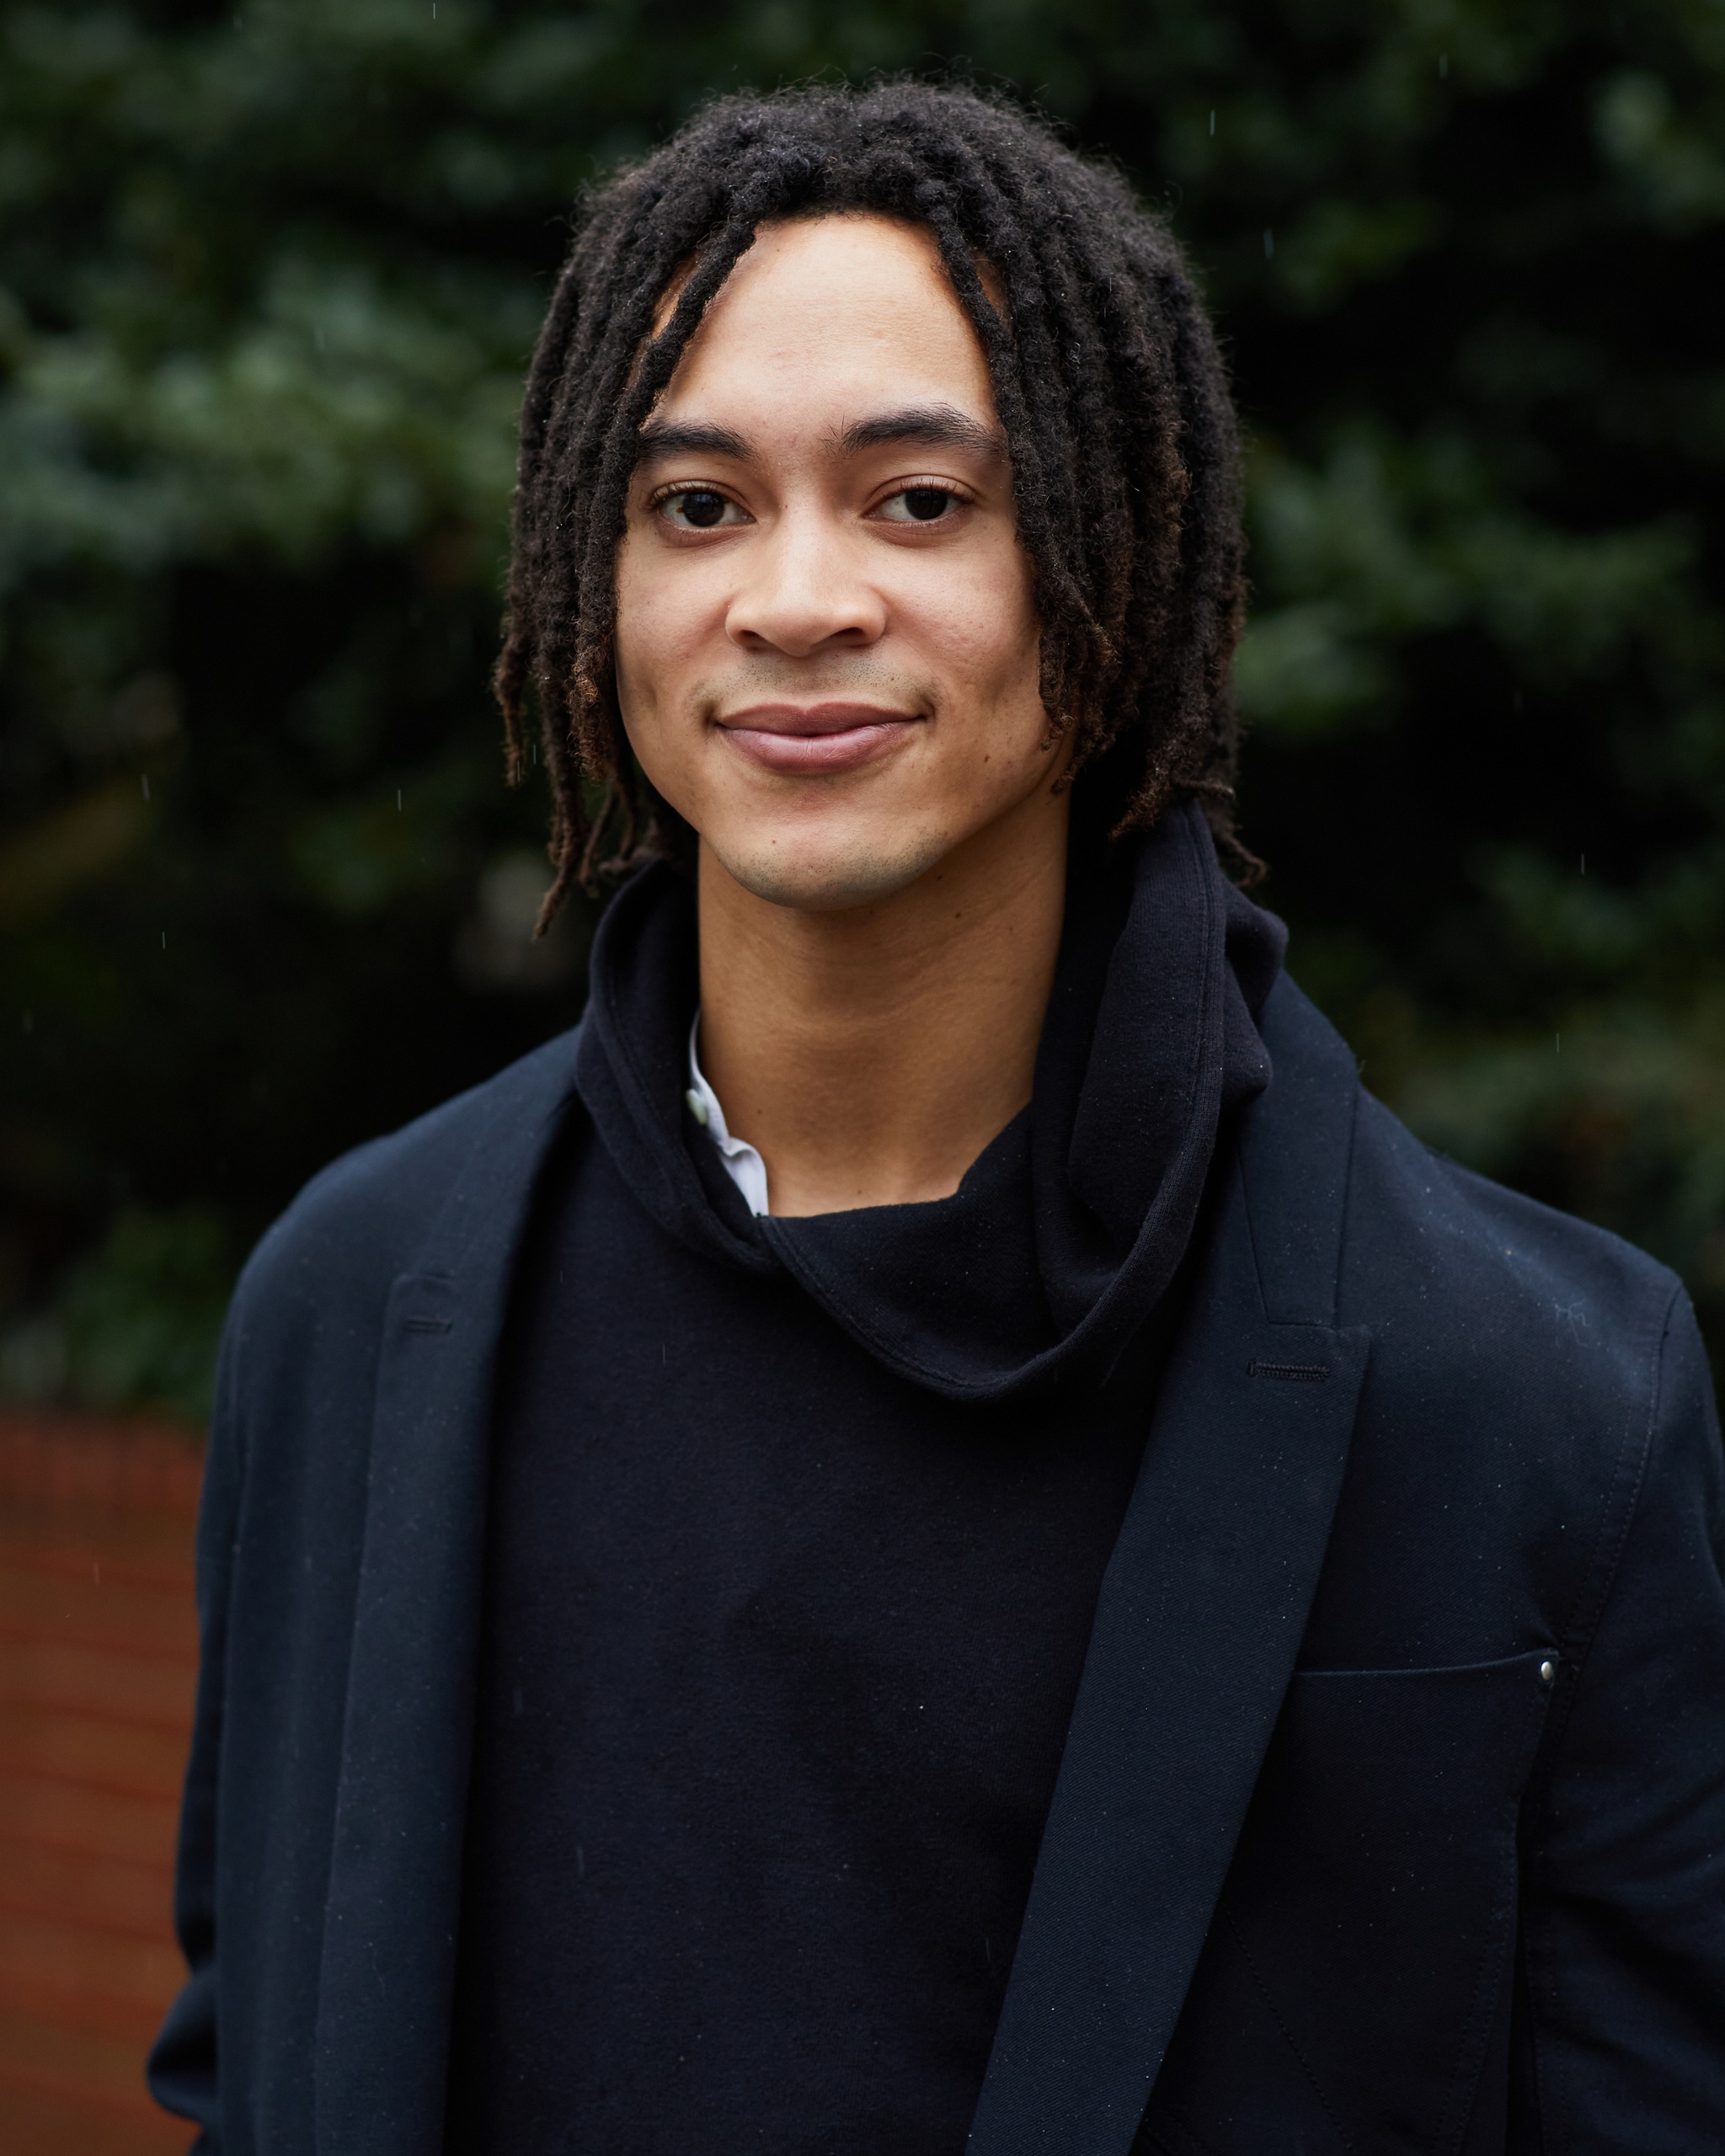 This is a portrait of Sandy Williams IV. They pose with the trees lining a street behind them. They are wearing a dark blazer over a dark hoodie and have their hair in short locs that fall to their jawline.